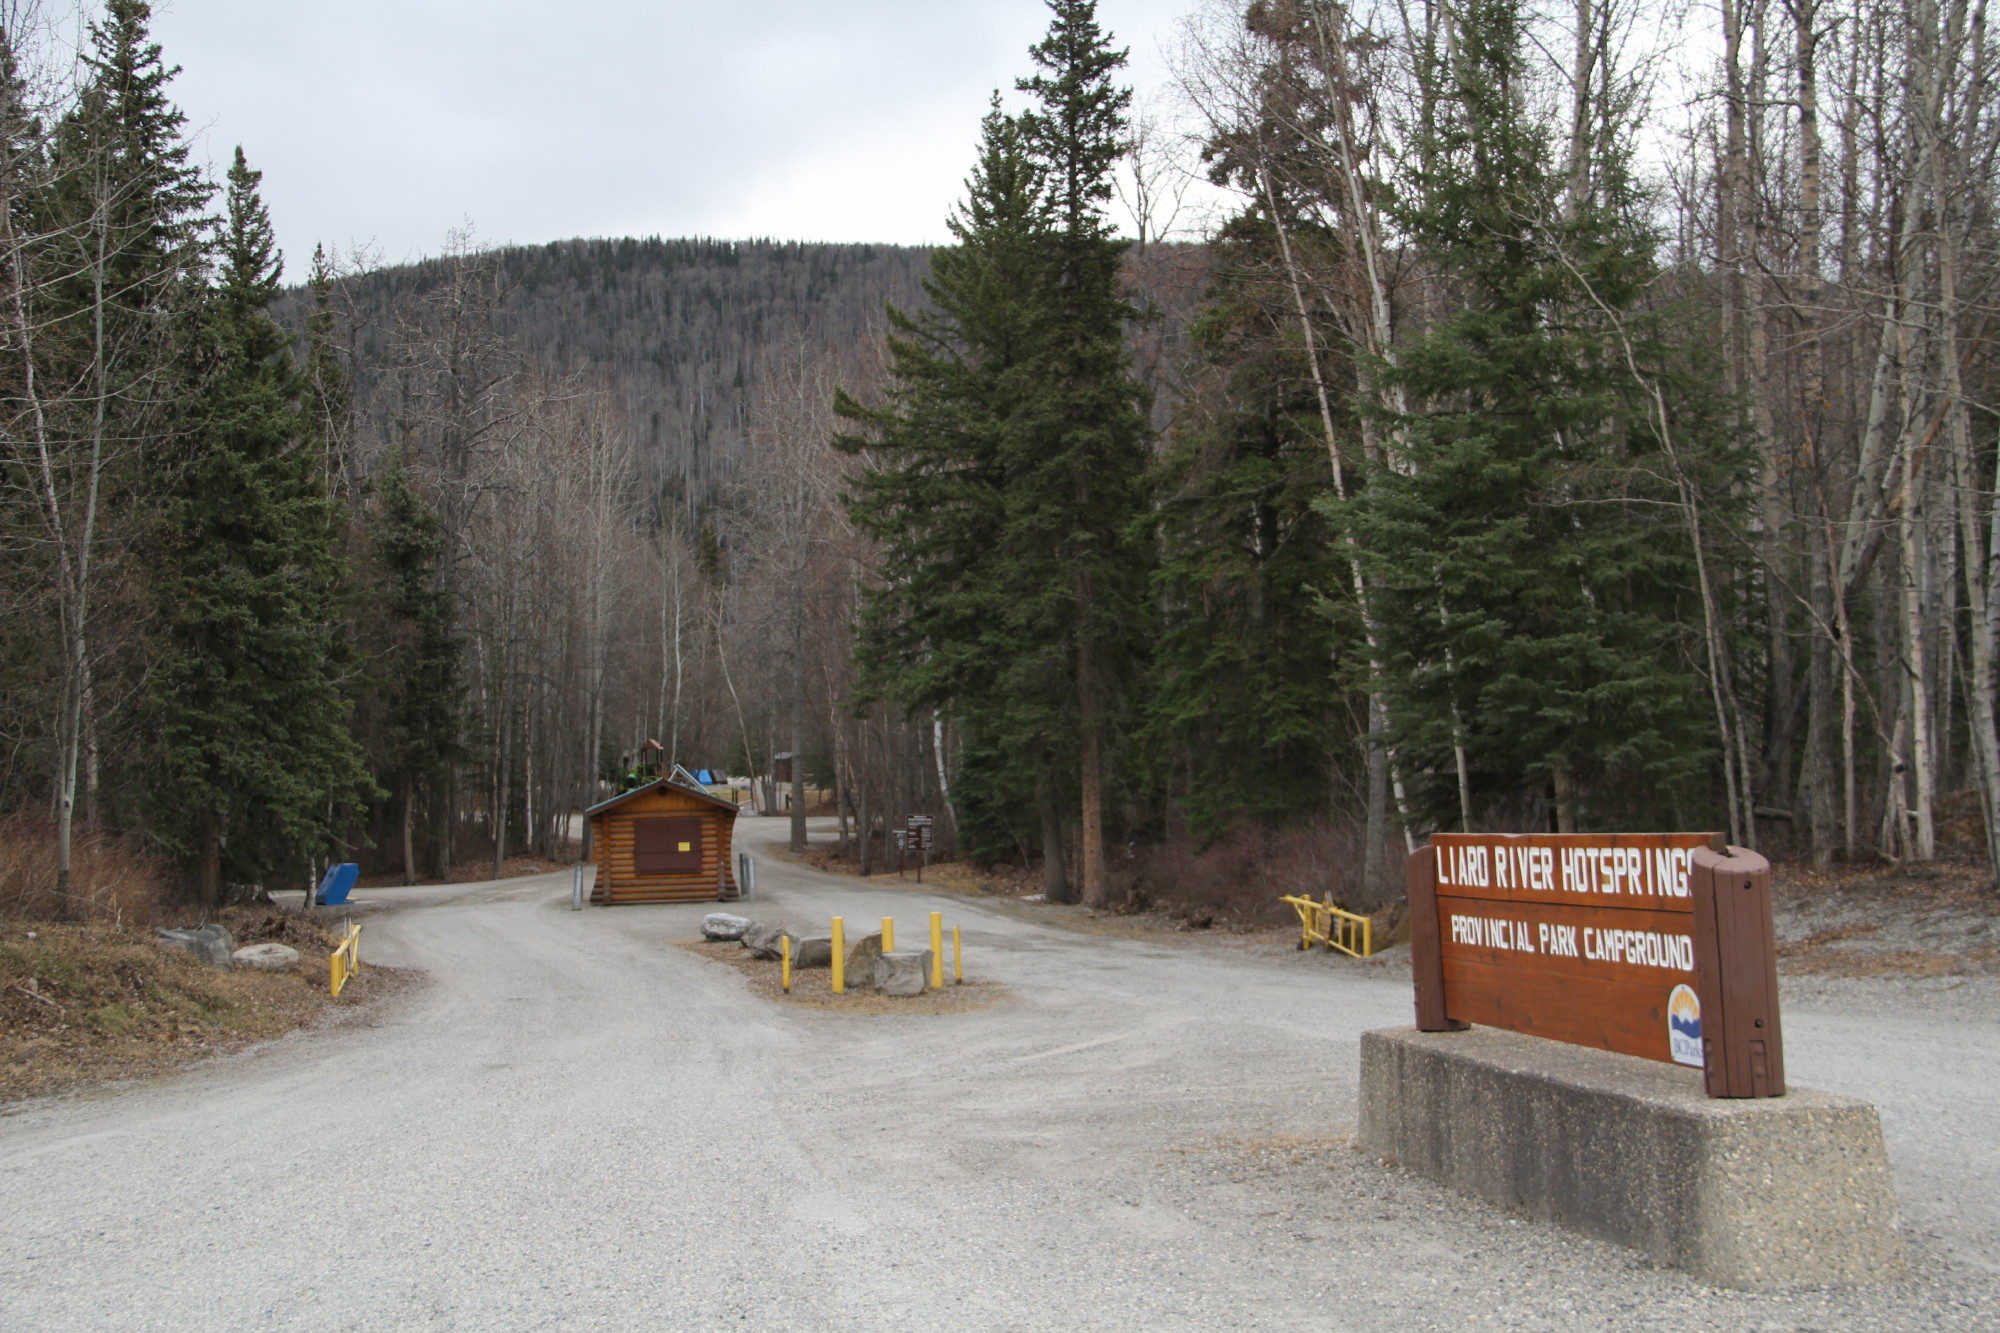 Entrance to campground with a sign that reads “Liard River Hot Springs”.